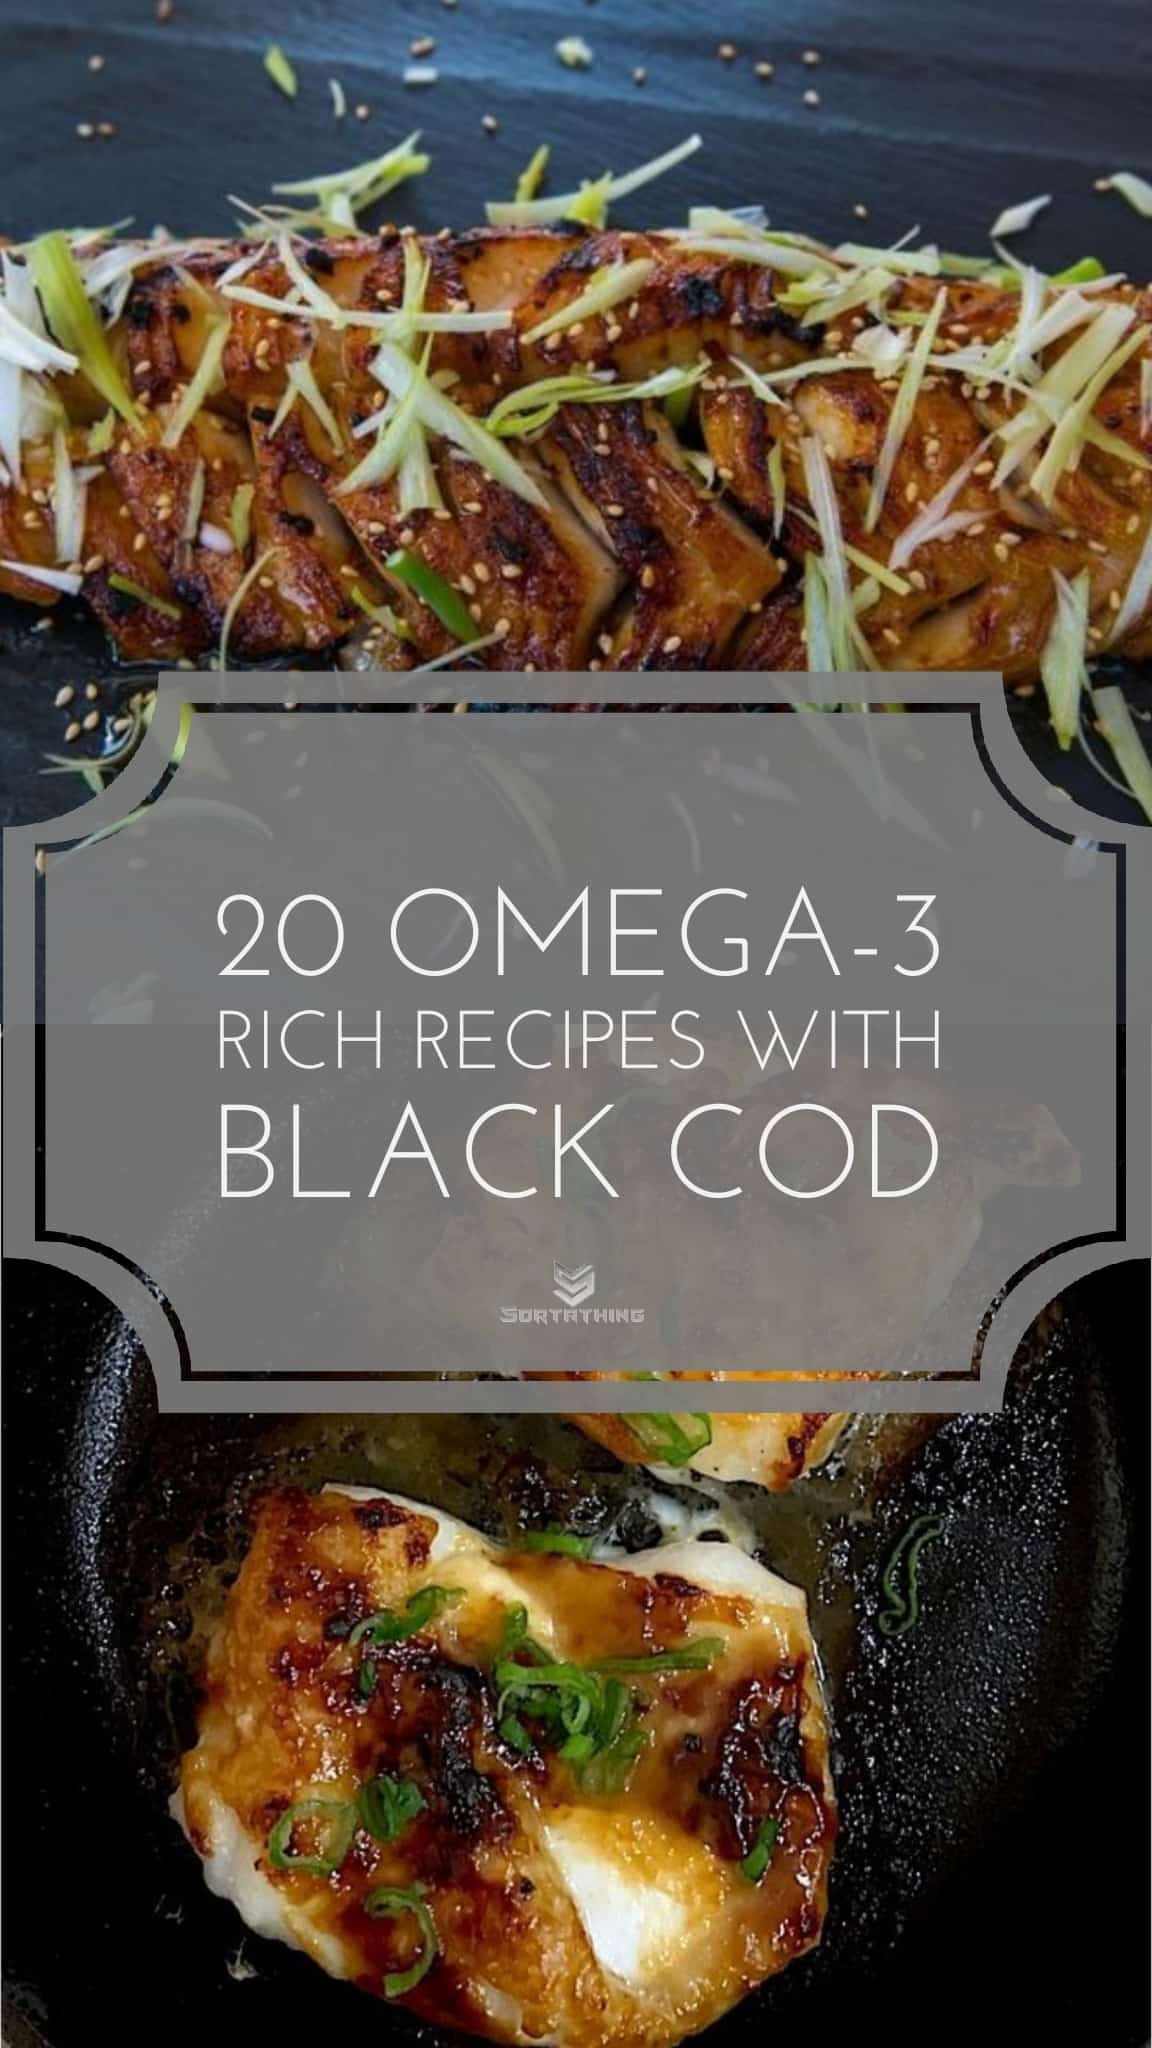 Homemade black cod recipe & black cod broiled with miso